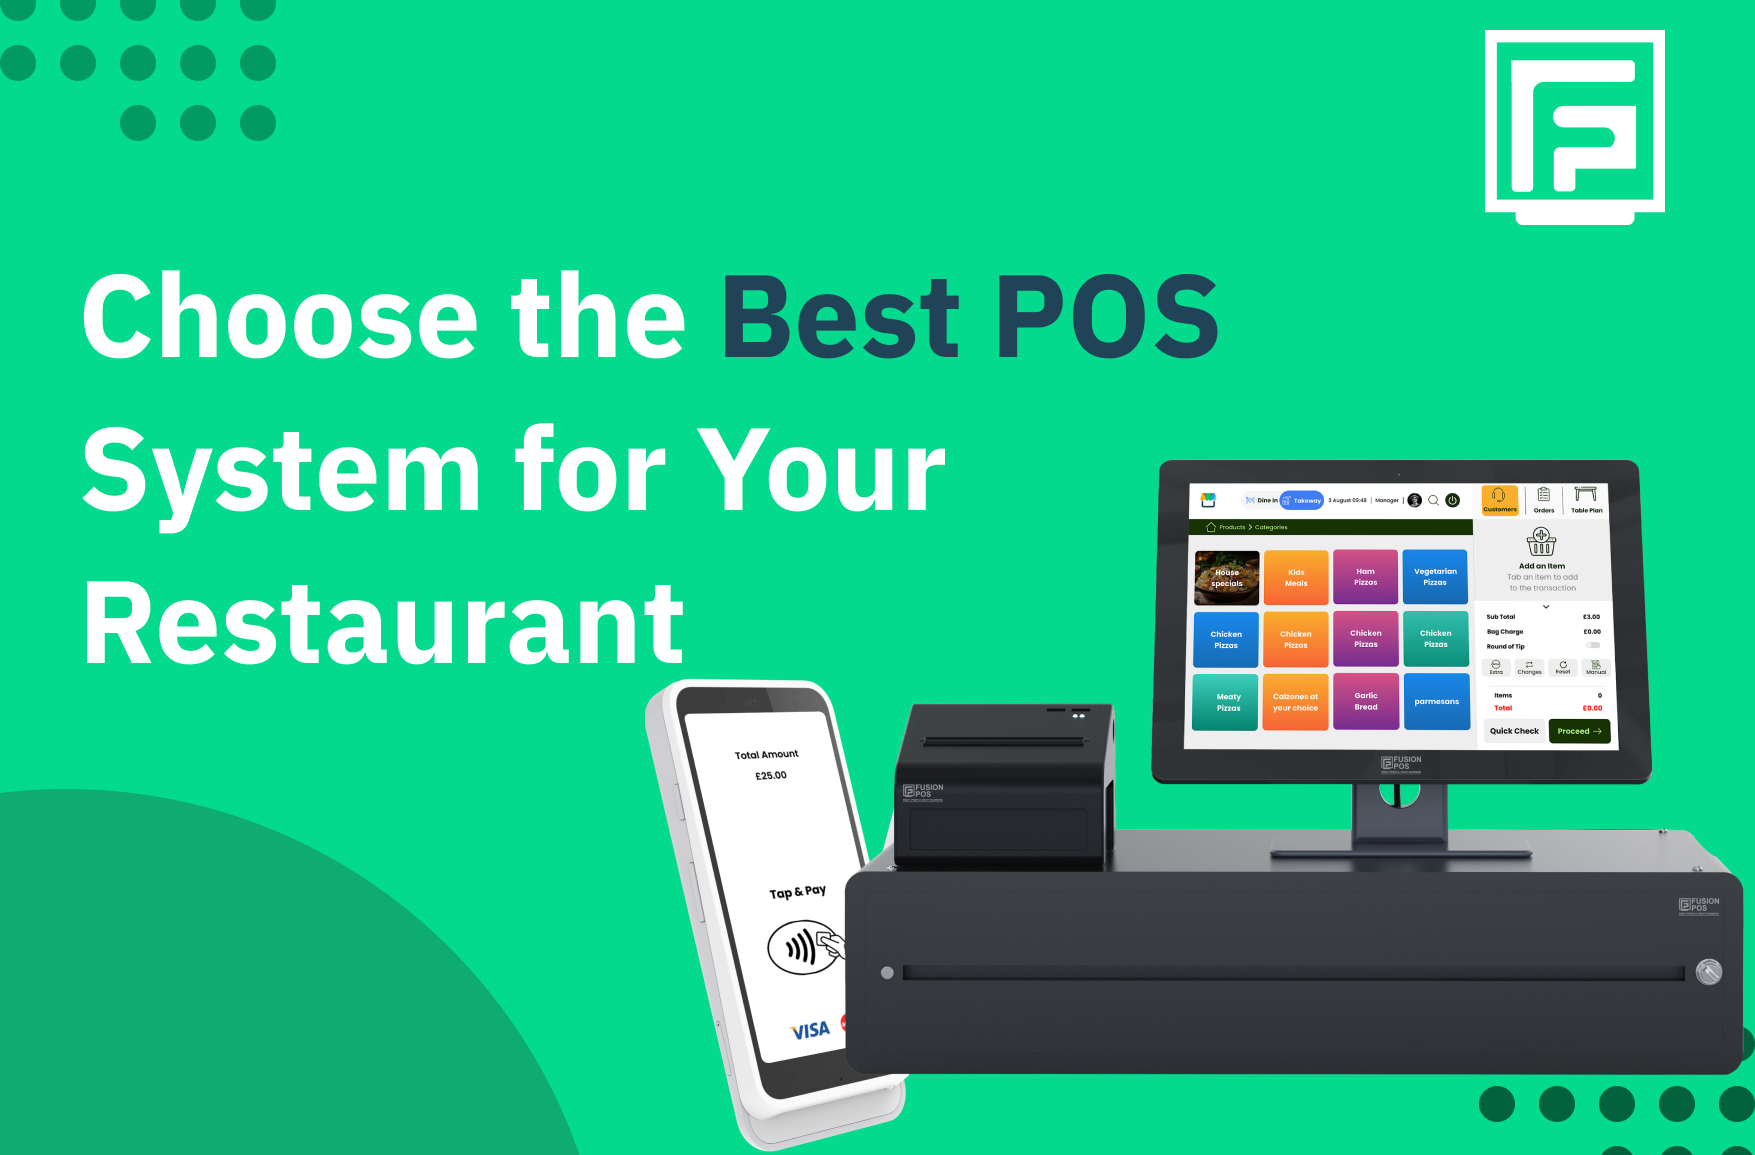 Choosing the Best EPOS System for Your Takeaway